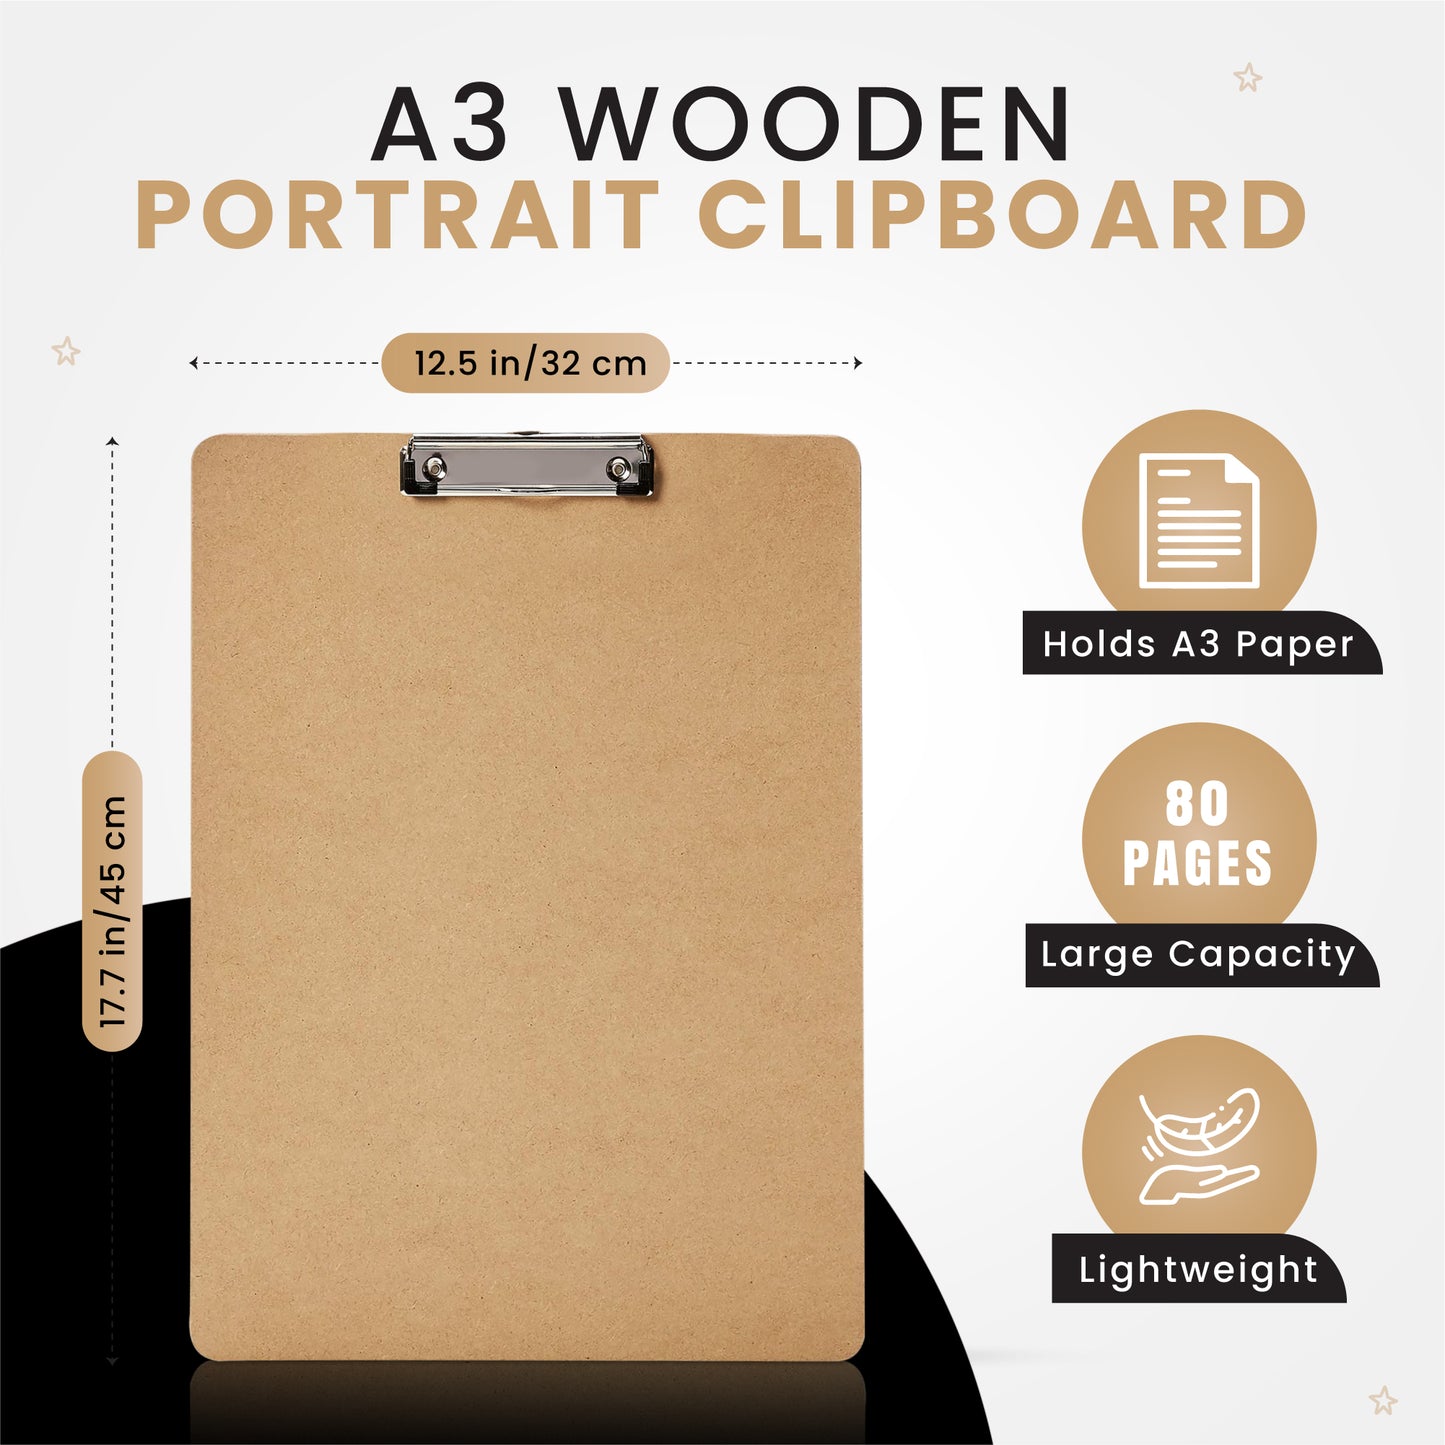 Pack of 12 A3 Wooden Portrait Clipboards by Janrax